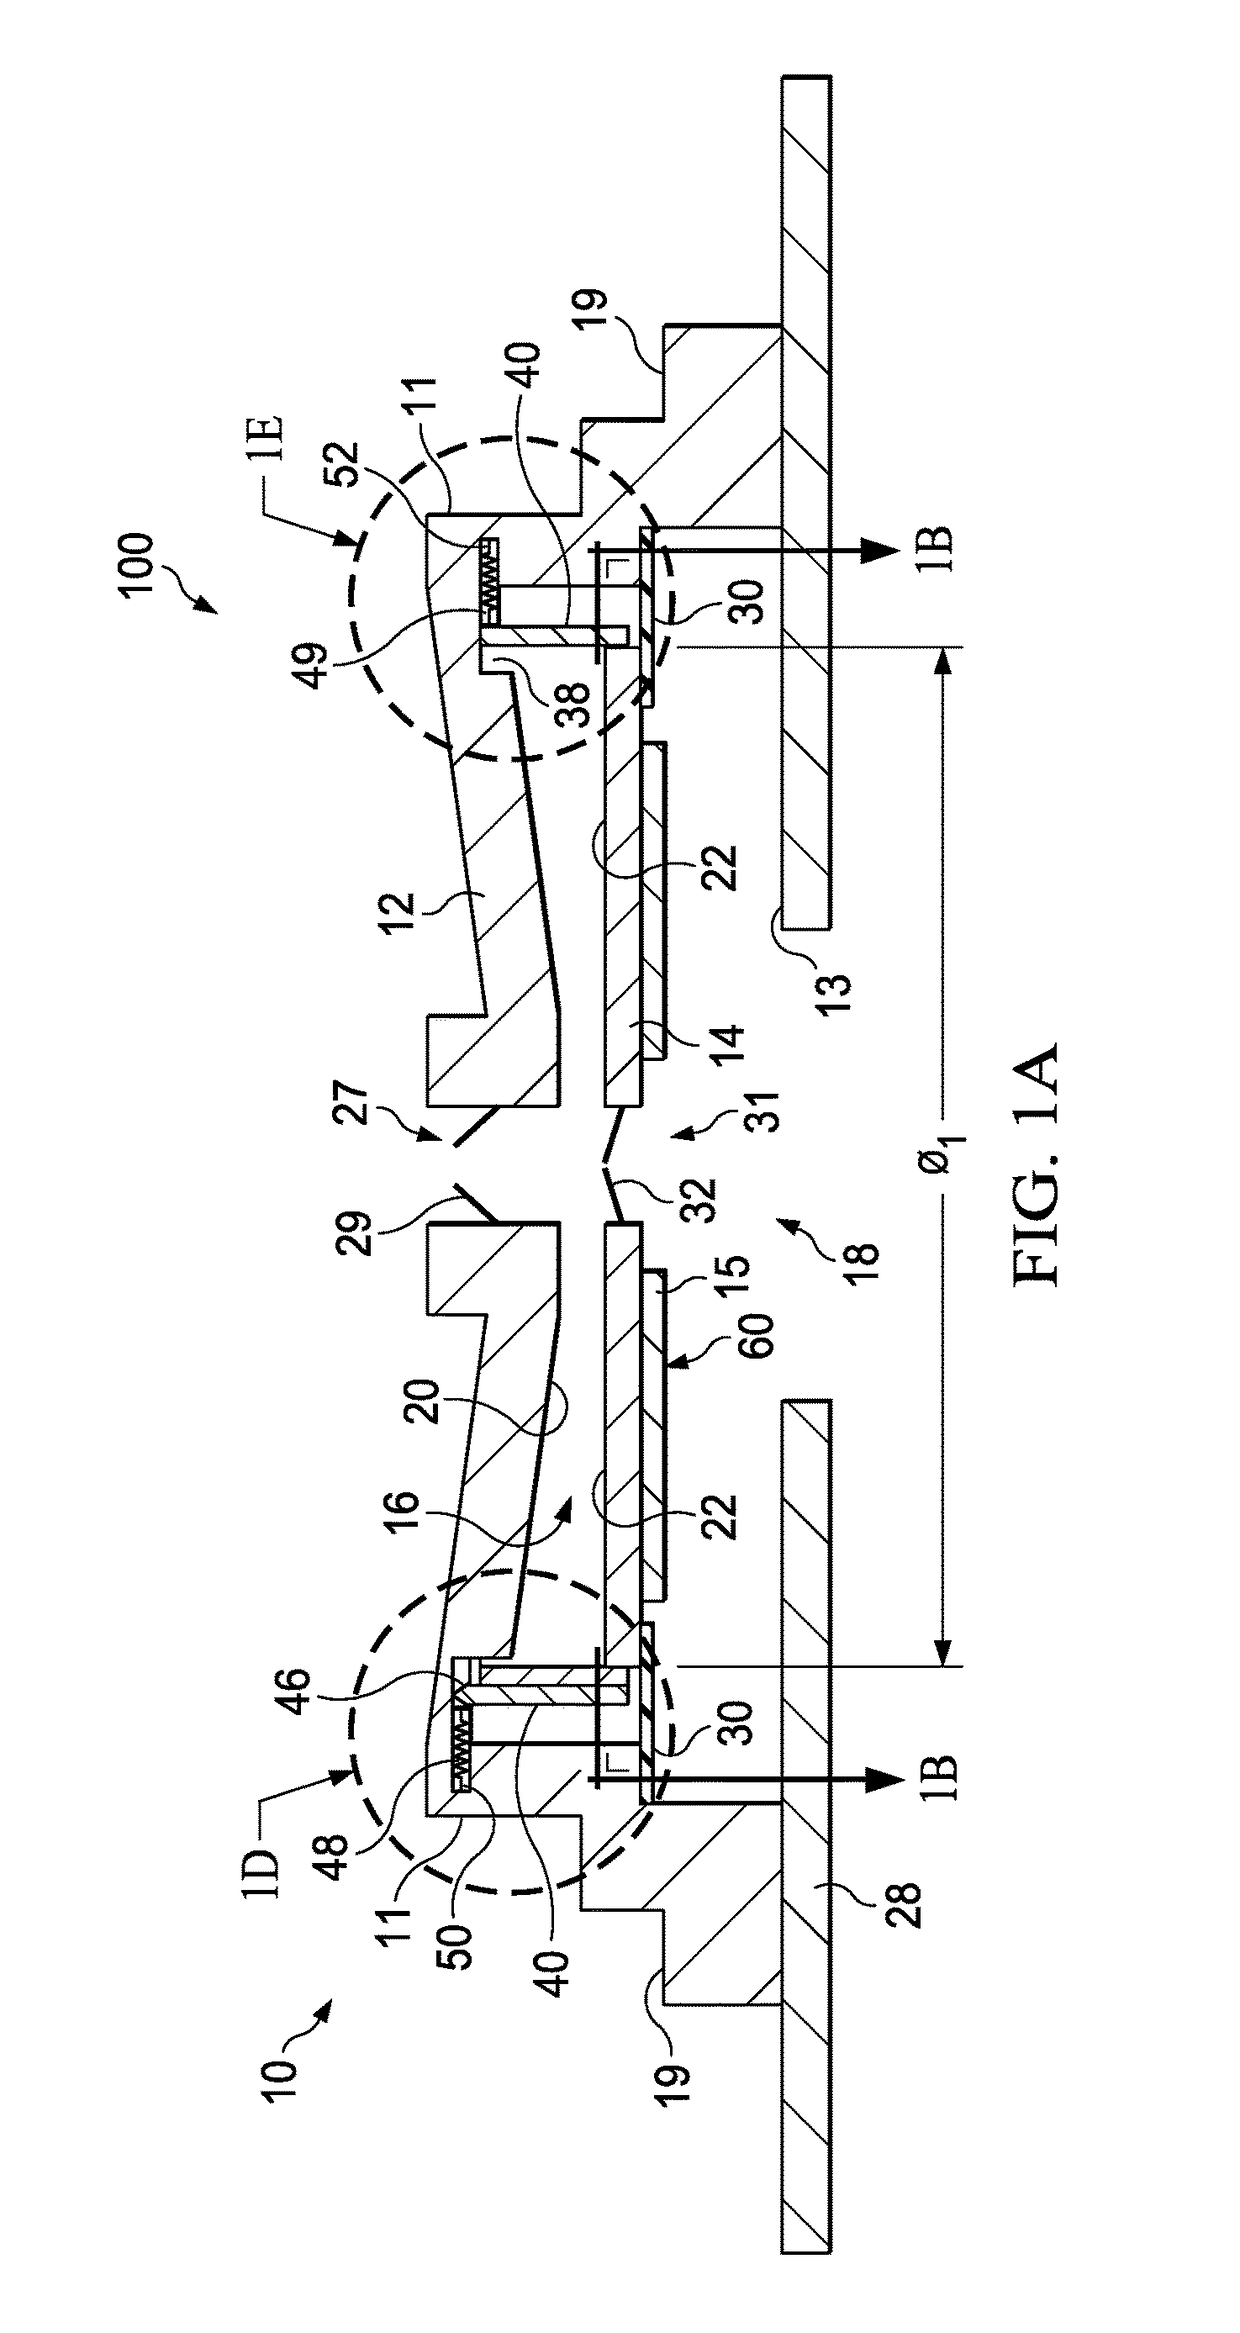 Systems and methods for regulating the resonant frequency of a disc pump cavity